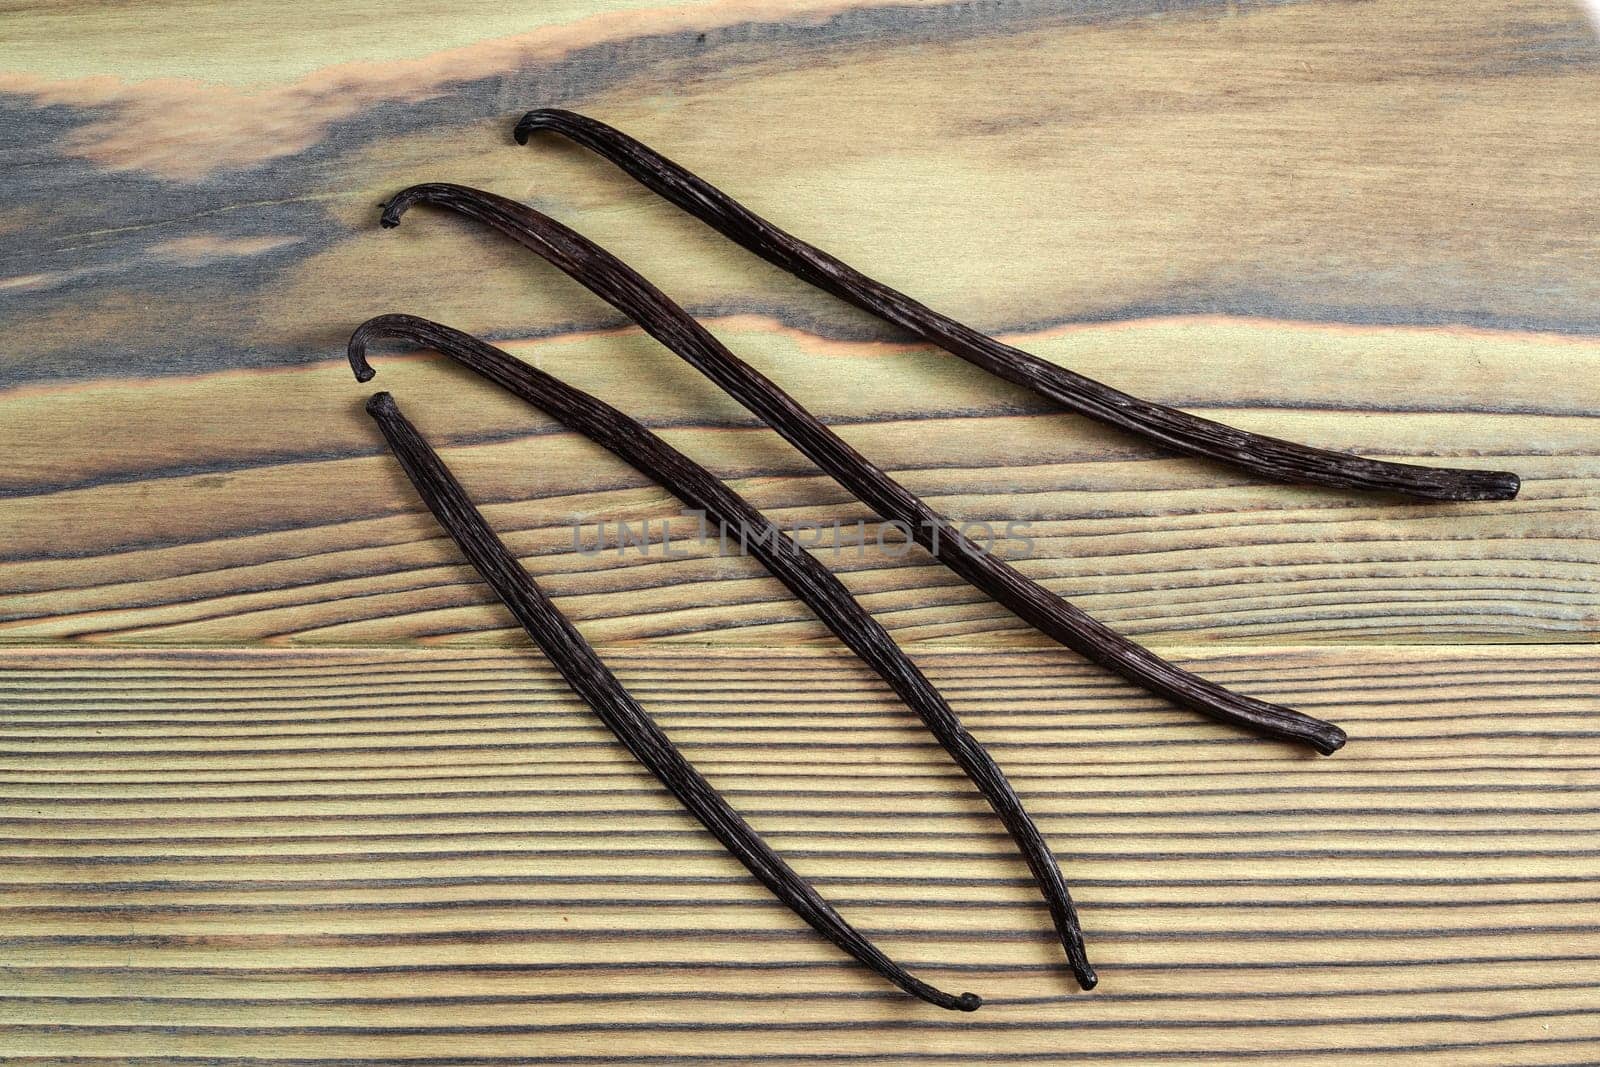 Four vanilla beans on wooden board, view from above